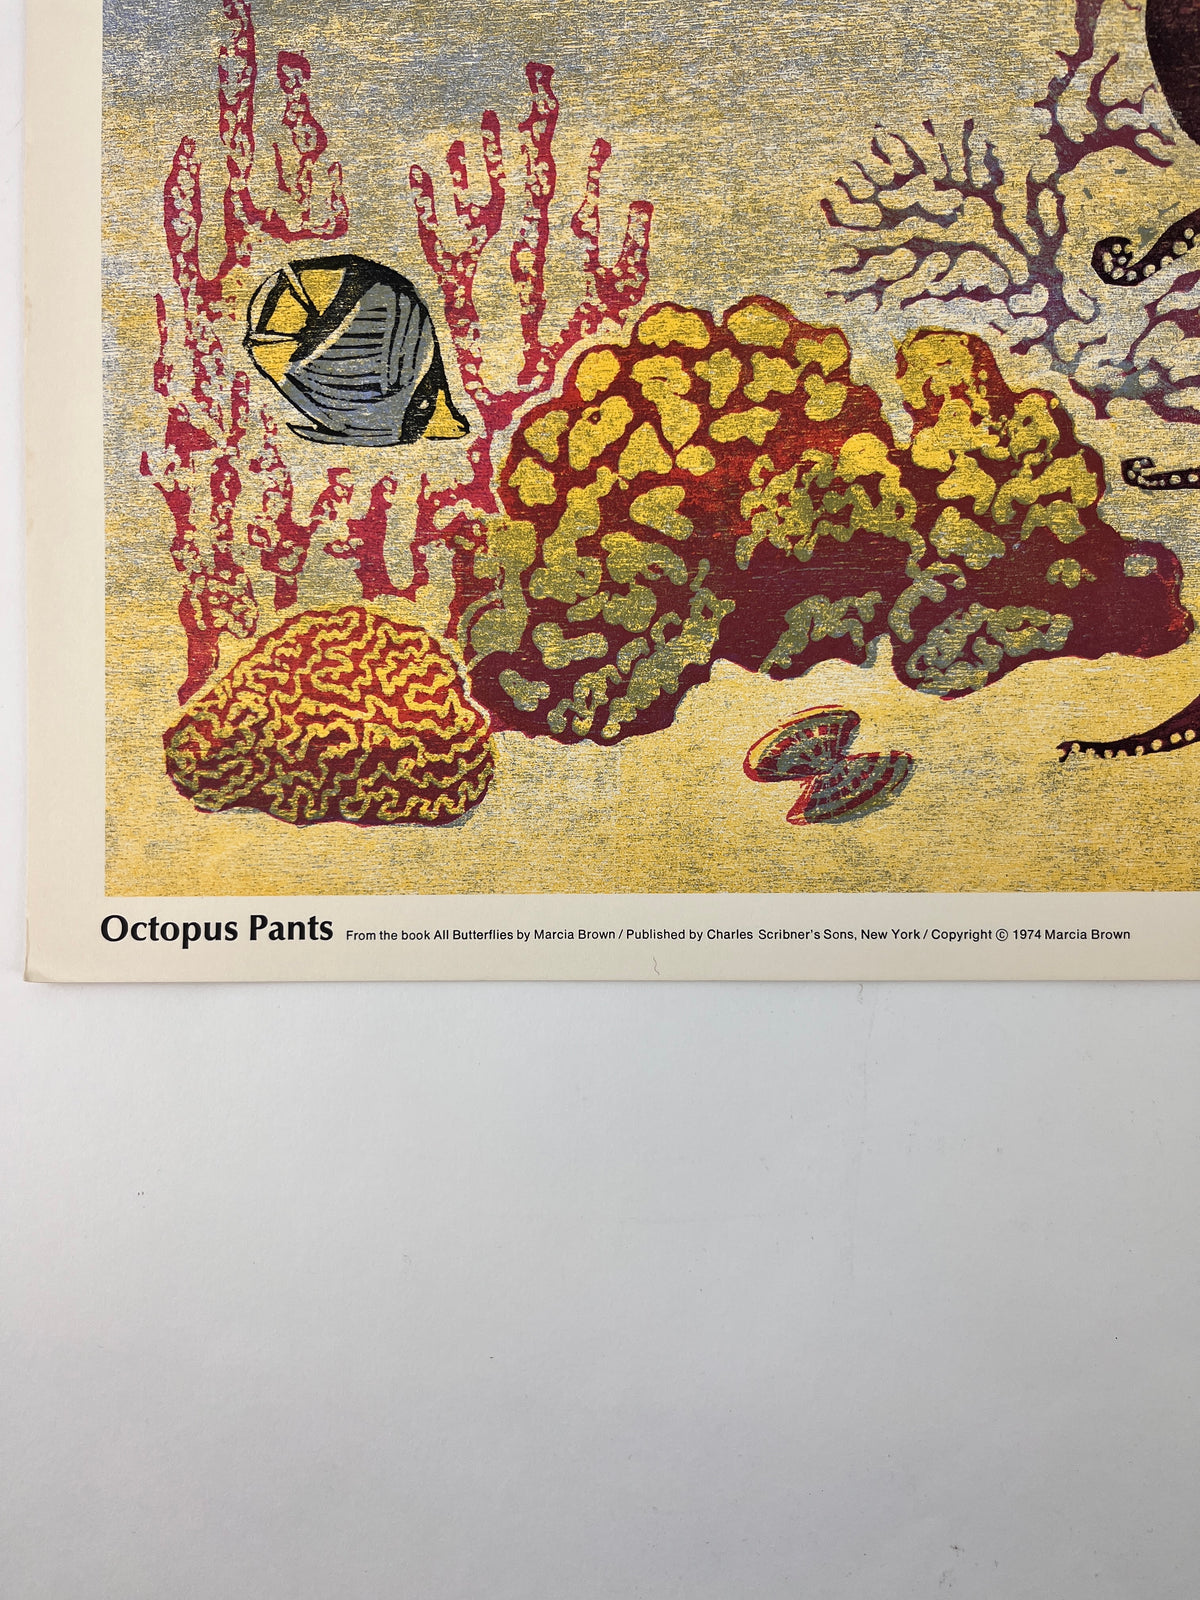 Vintage “Octopus Pants” Lithograph by Marcia Brown, 1974